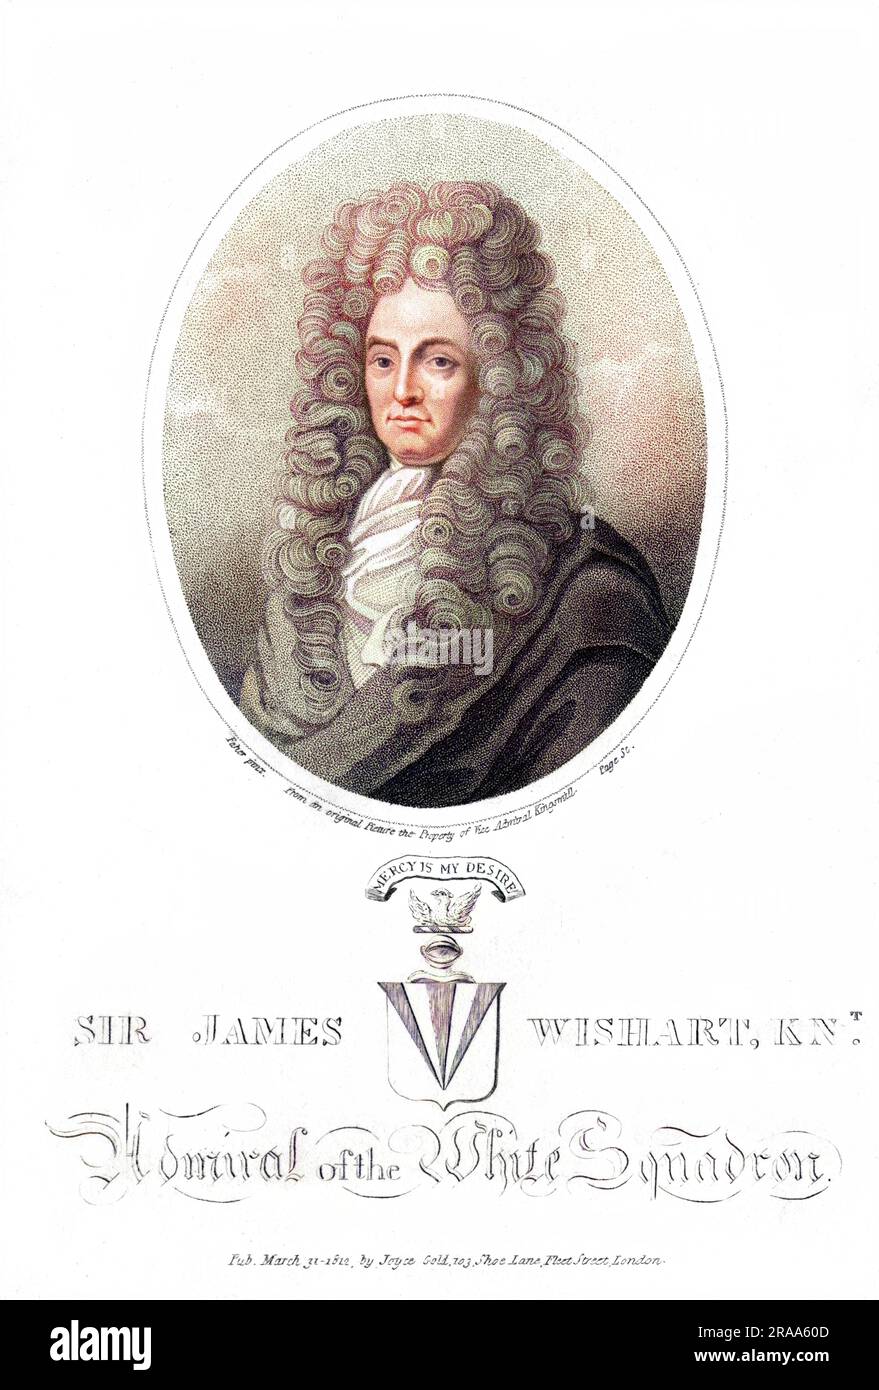 SIR JAMES WISHART naval commander, Admiral of the White Squadron     Date: ? - 1723 Stock Photo